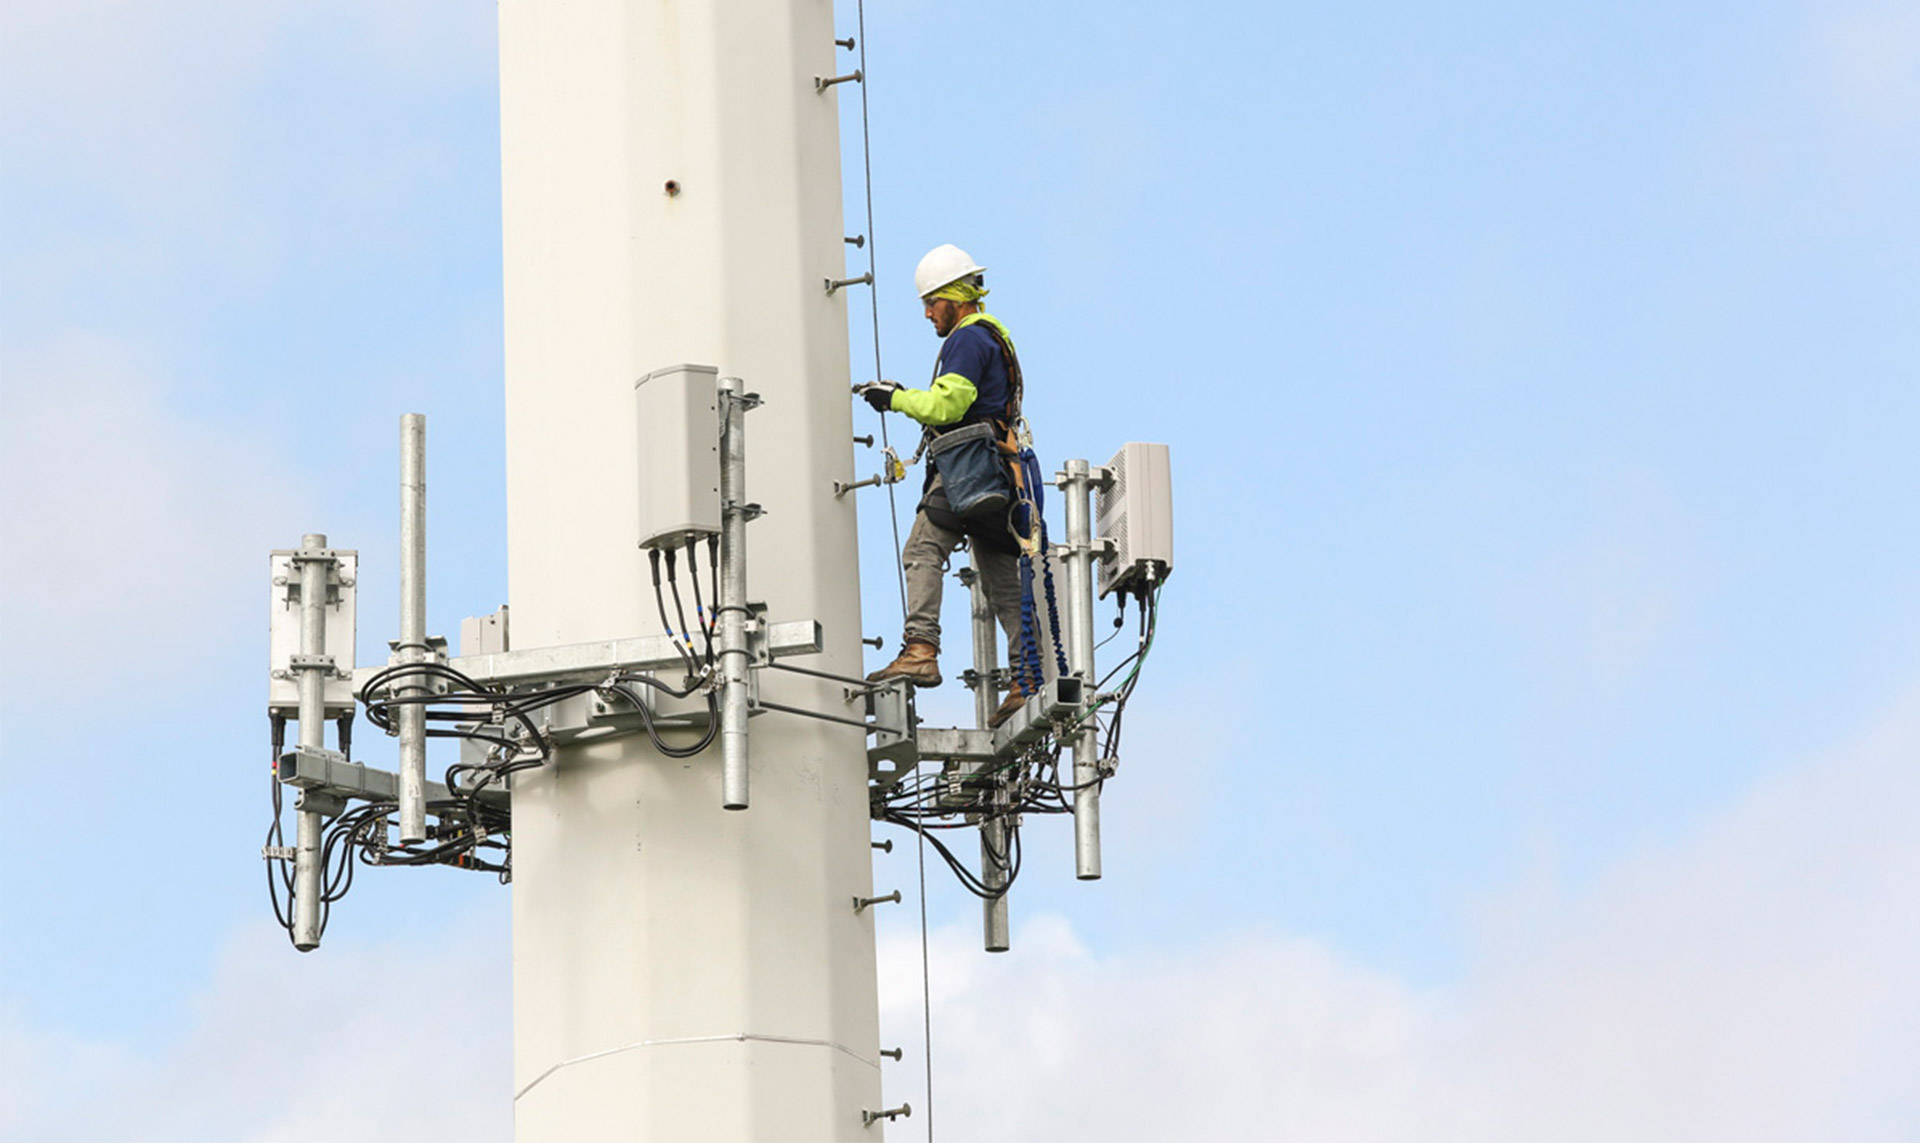 worker in hardhat working on cell tower